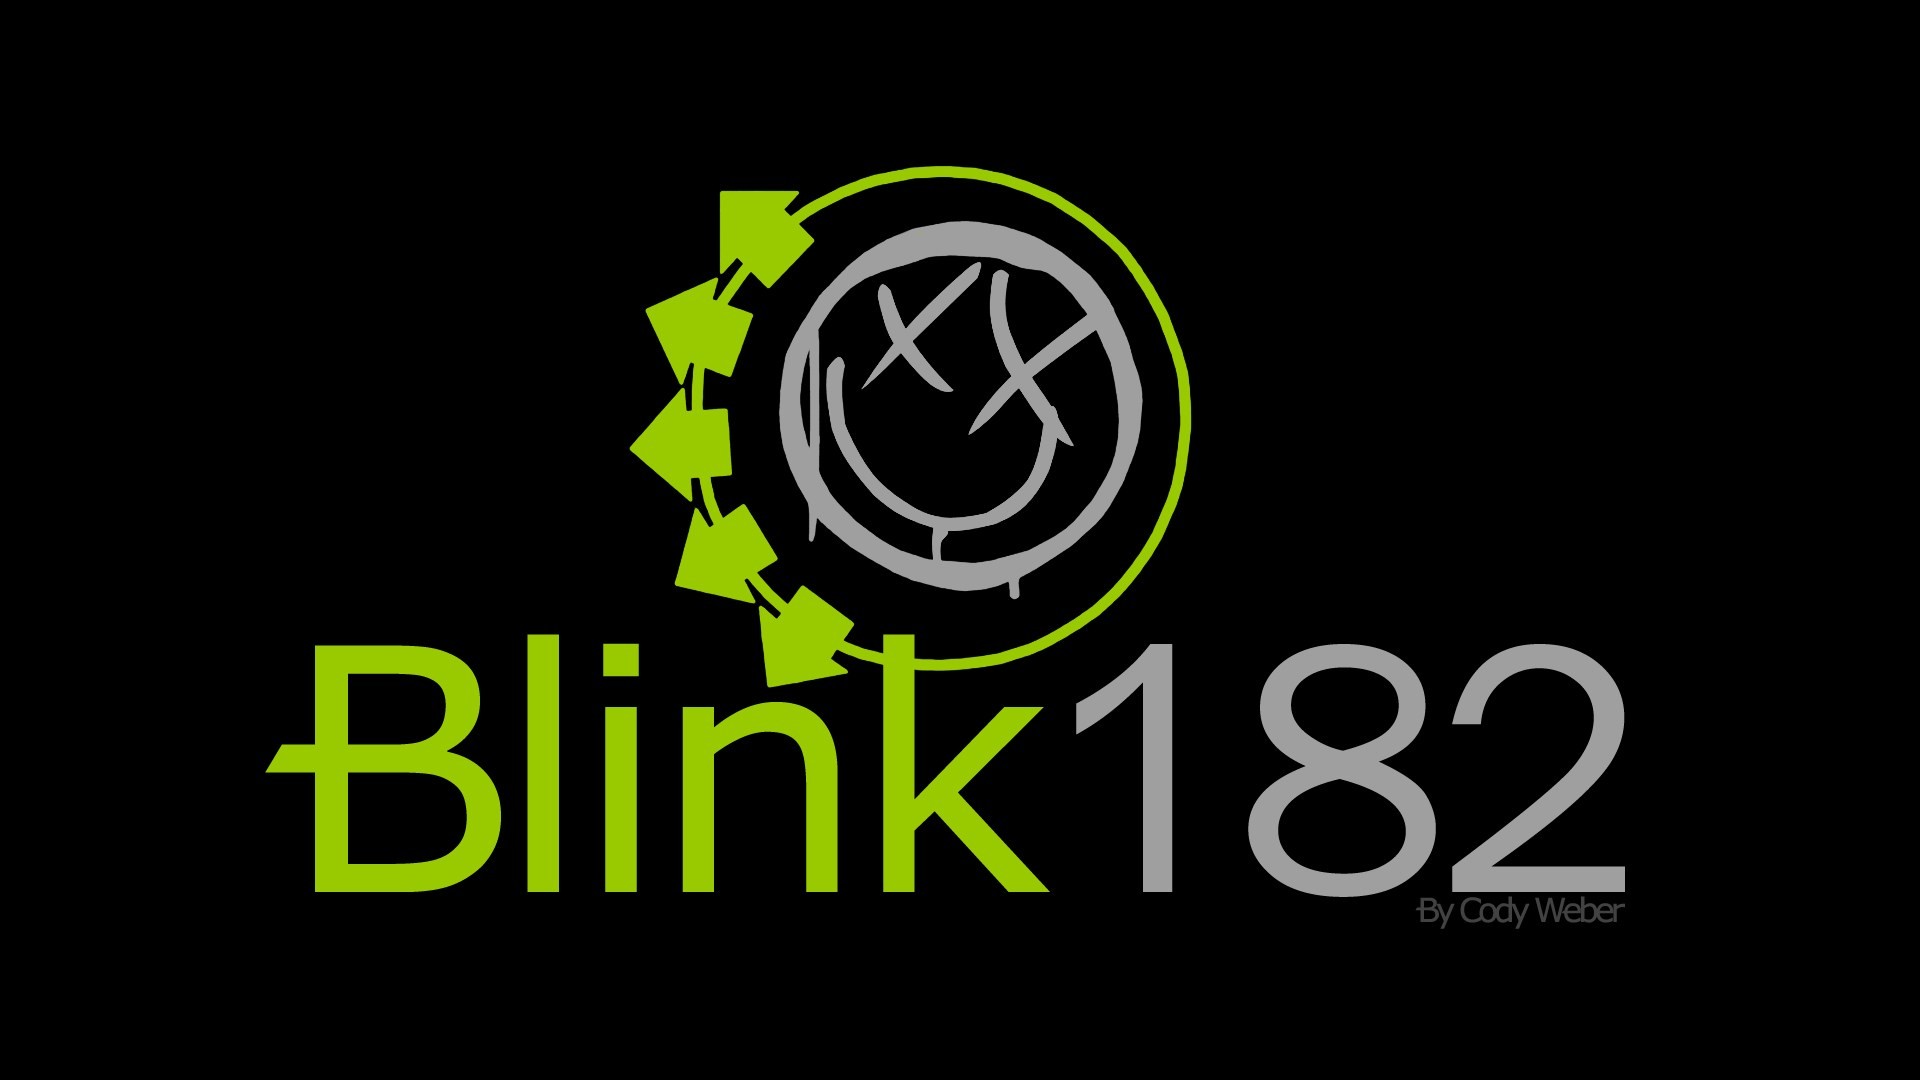 1920x1080 Perfect Blink 182 Wallpaper Download free wallpapers and desktop backgrounds  in a variety of screen resolutions